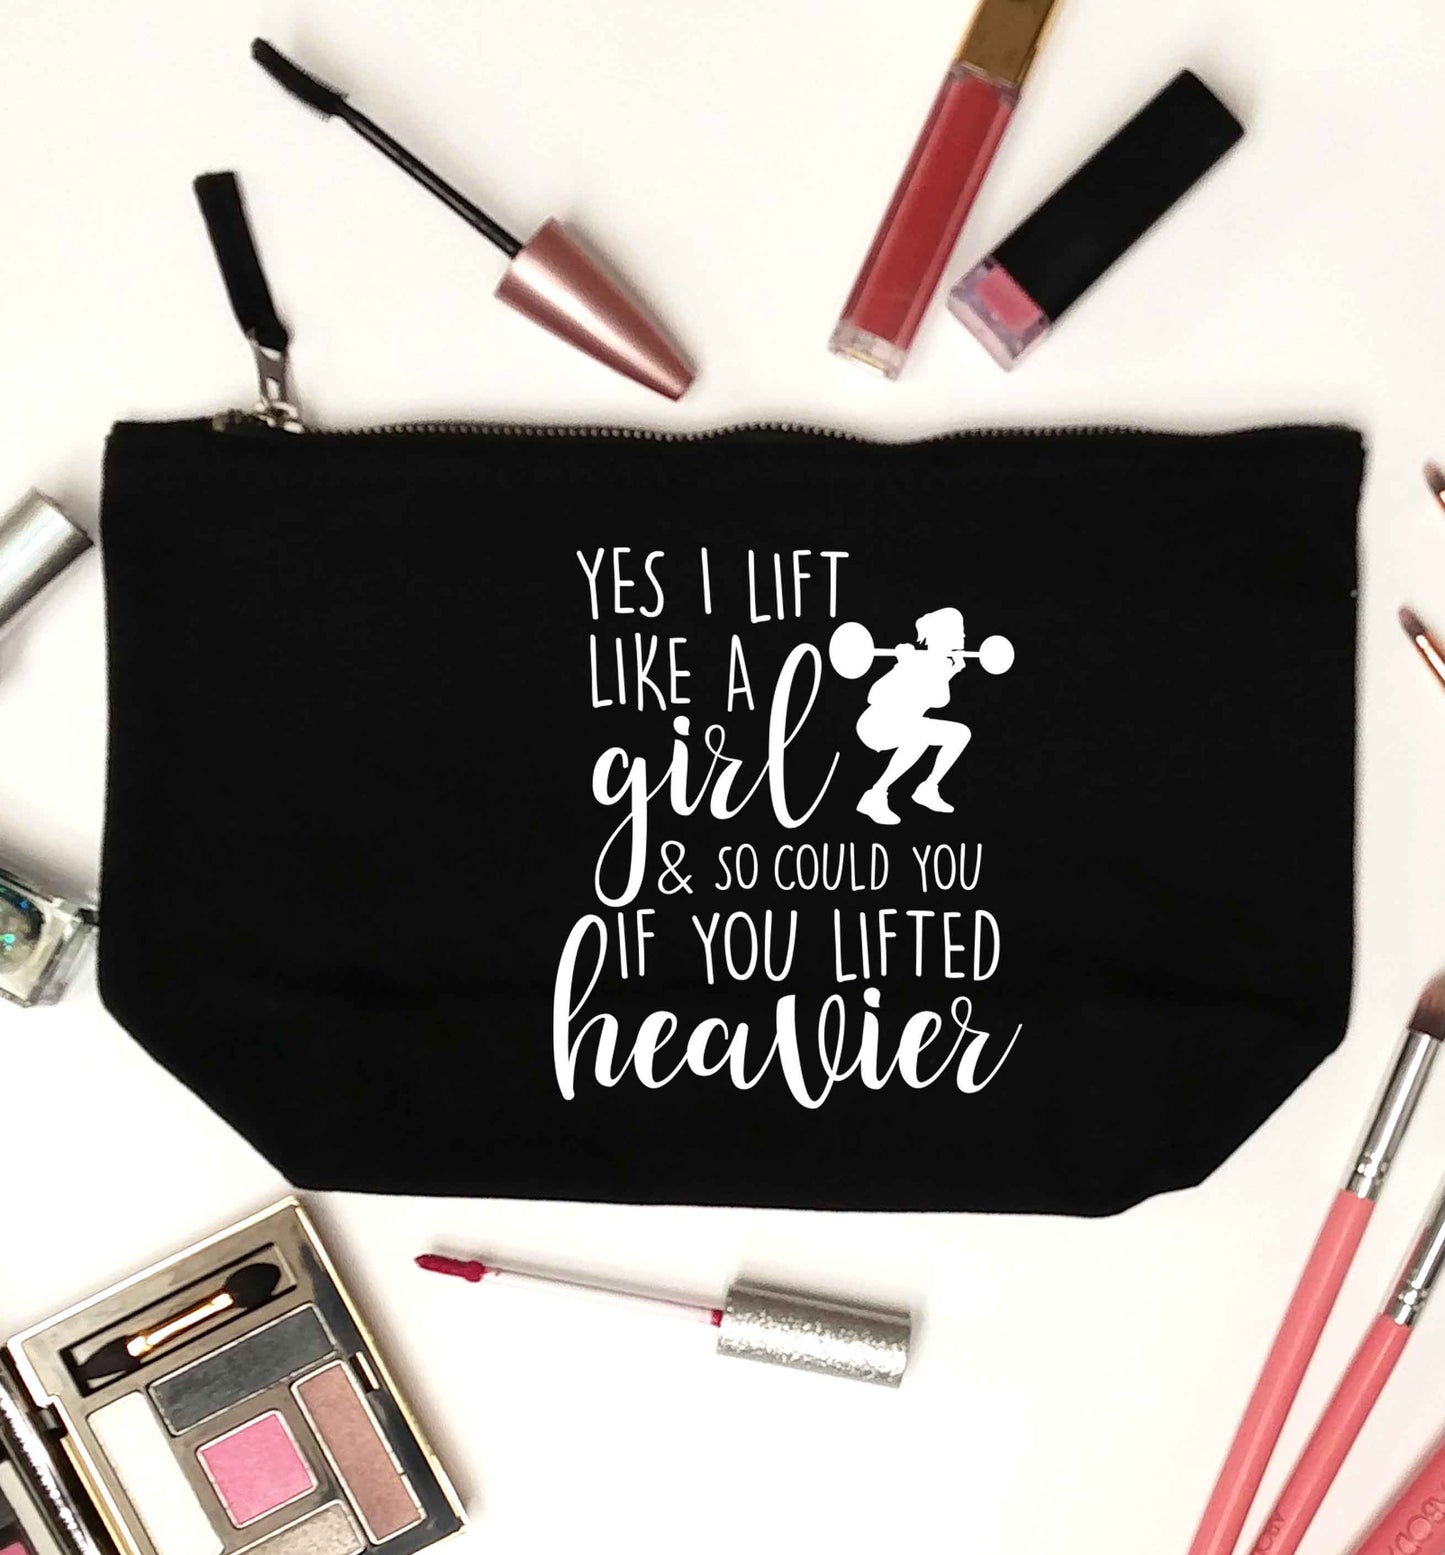 Yes I lift like a girl and so could you if you lifted heavier black makeup bag